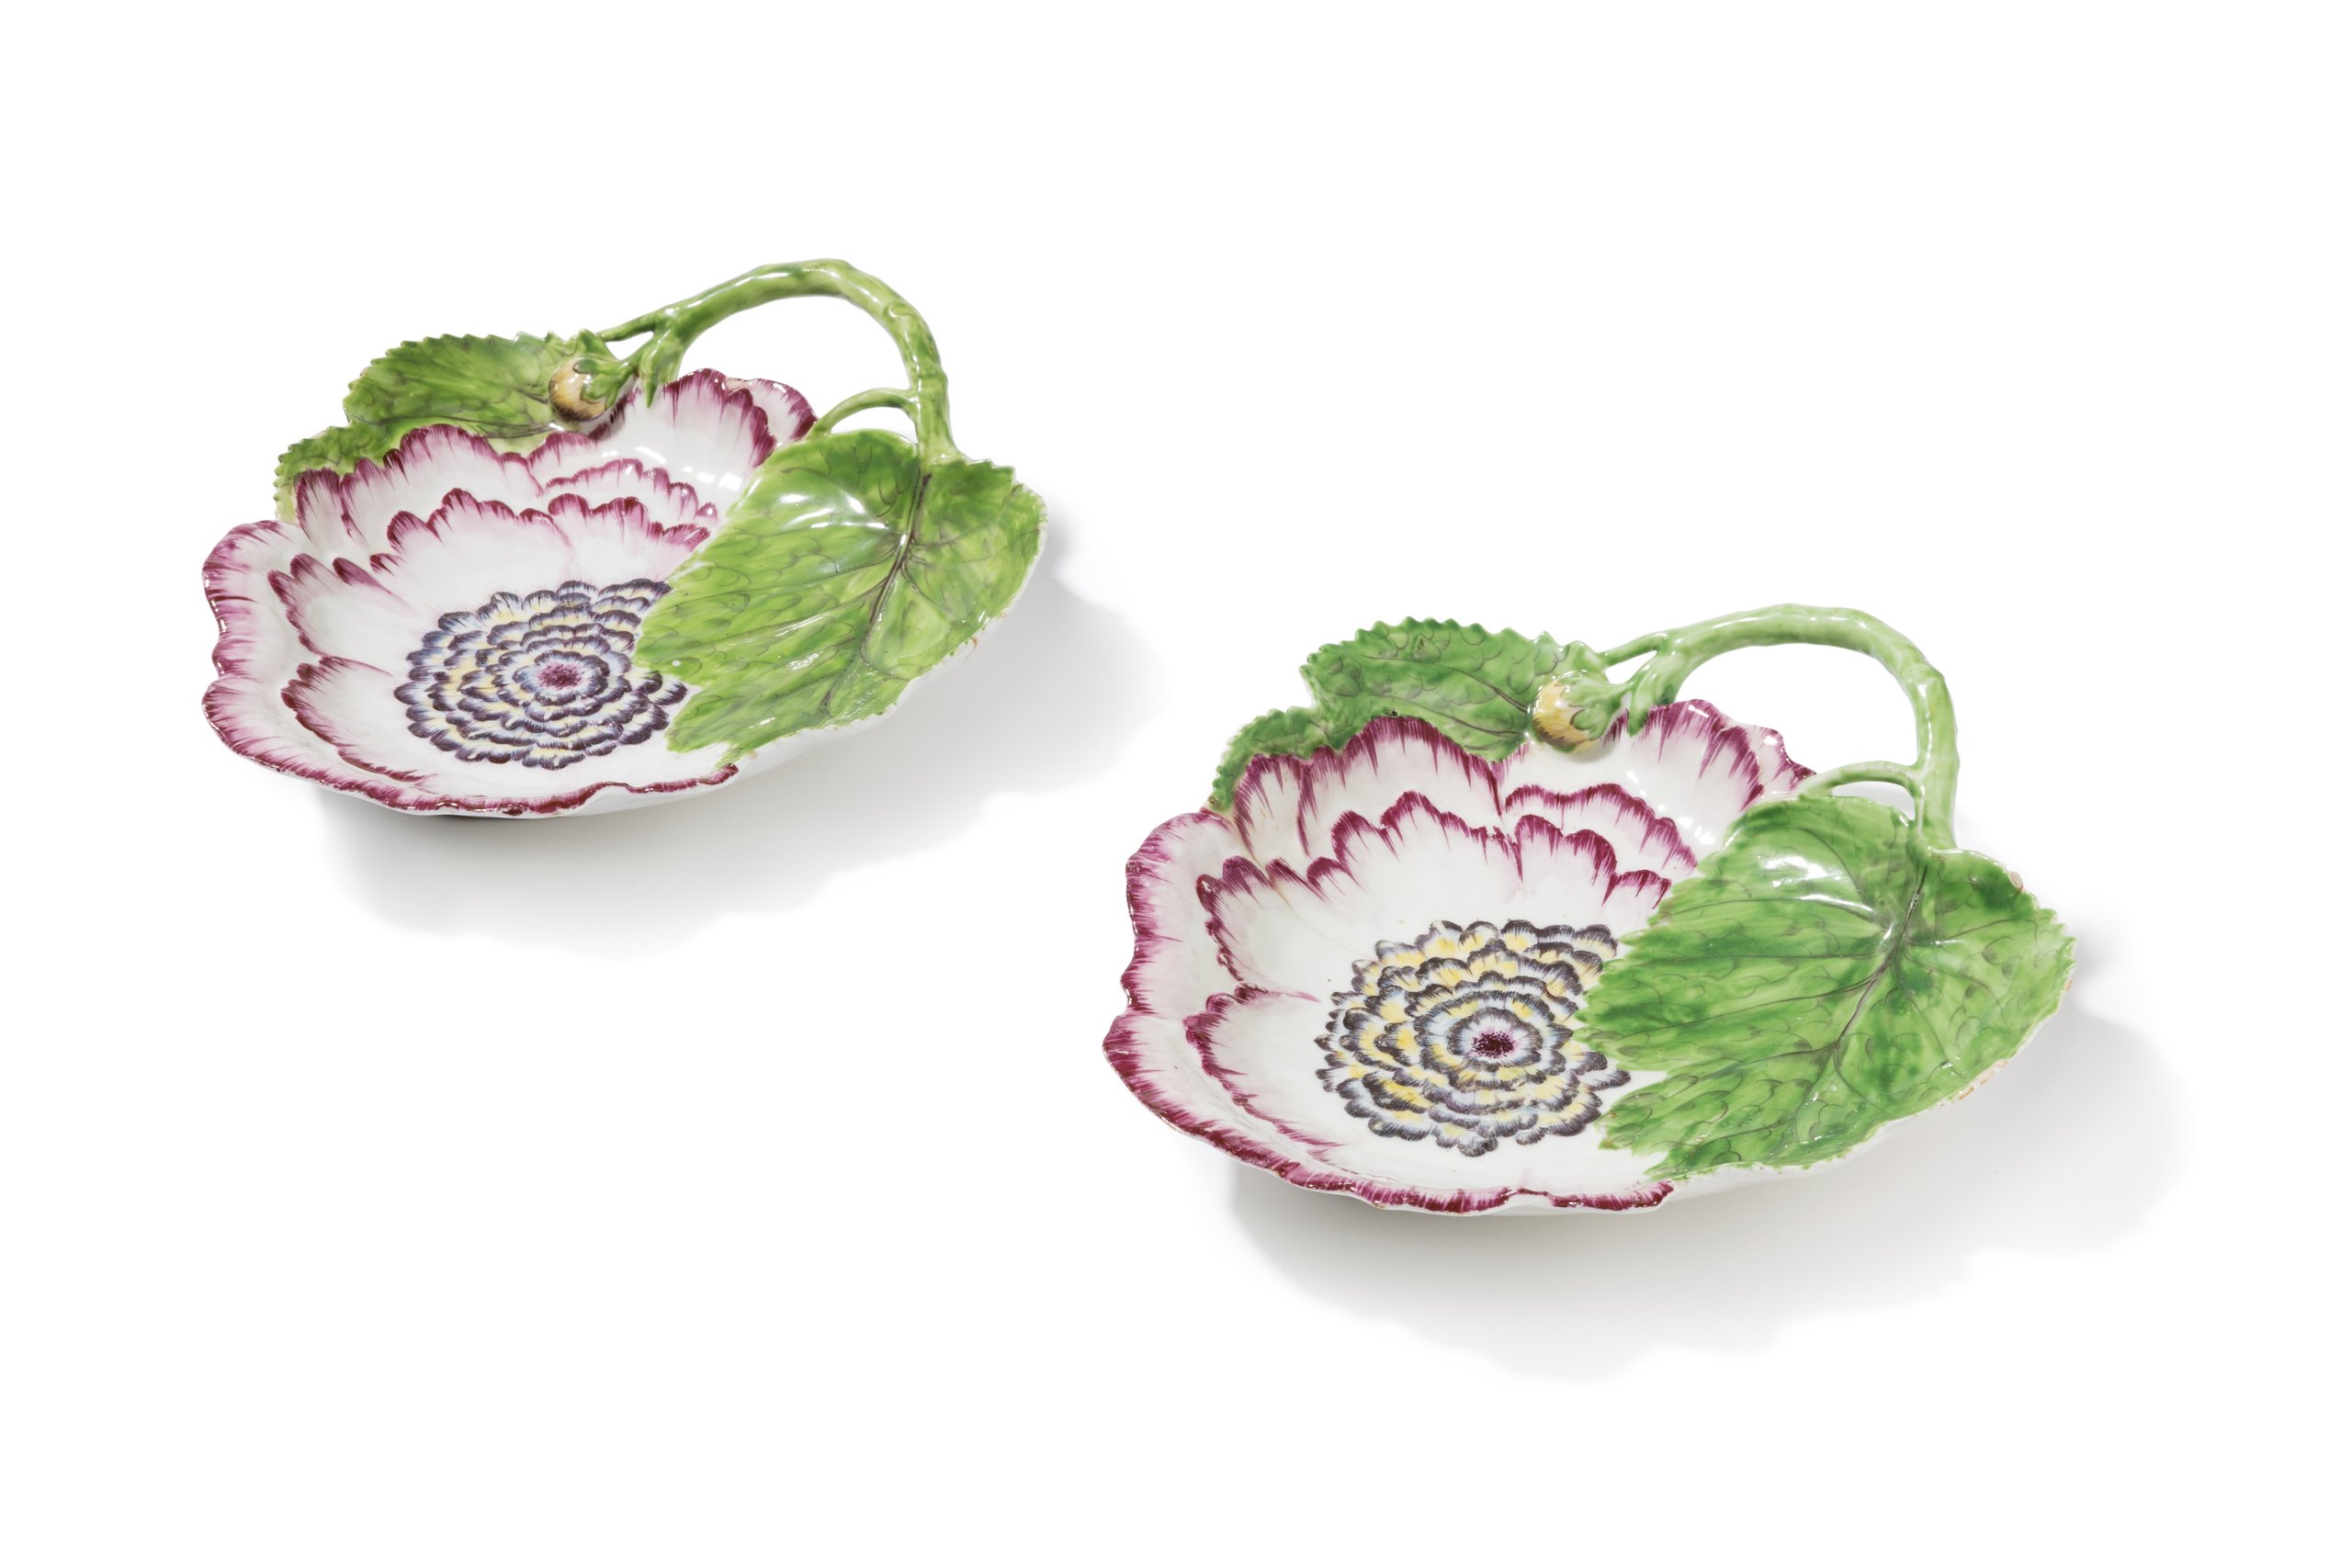 Pair of porcelain dishes from Chelsea